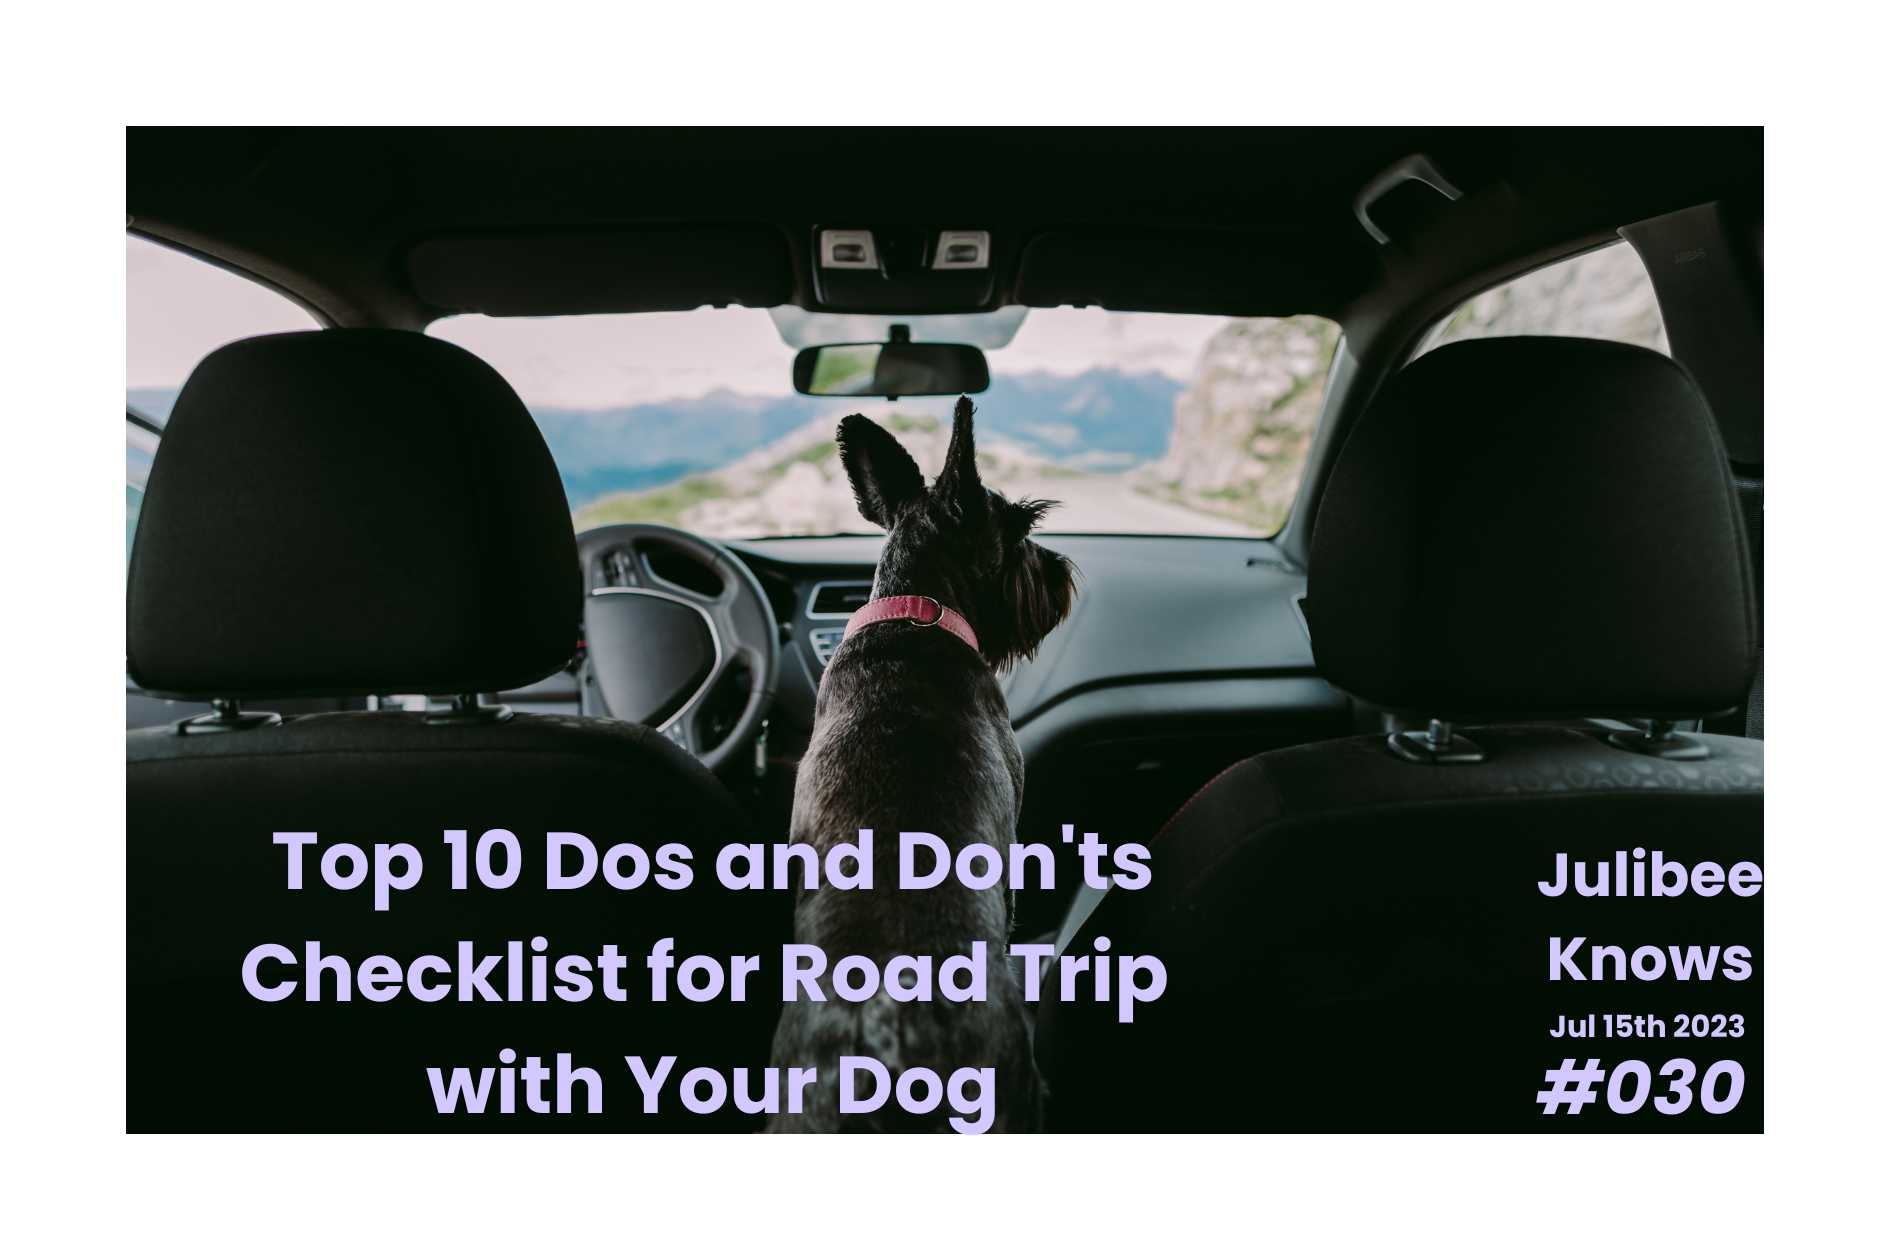 Top 10 Dos and Don'ts Checklist for Road Trip with Your Dog - Julibee's